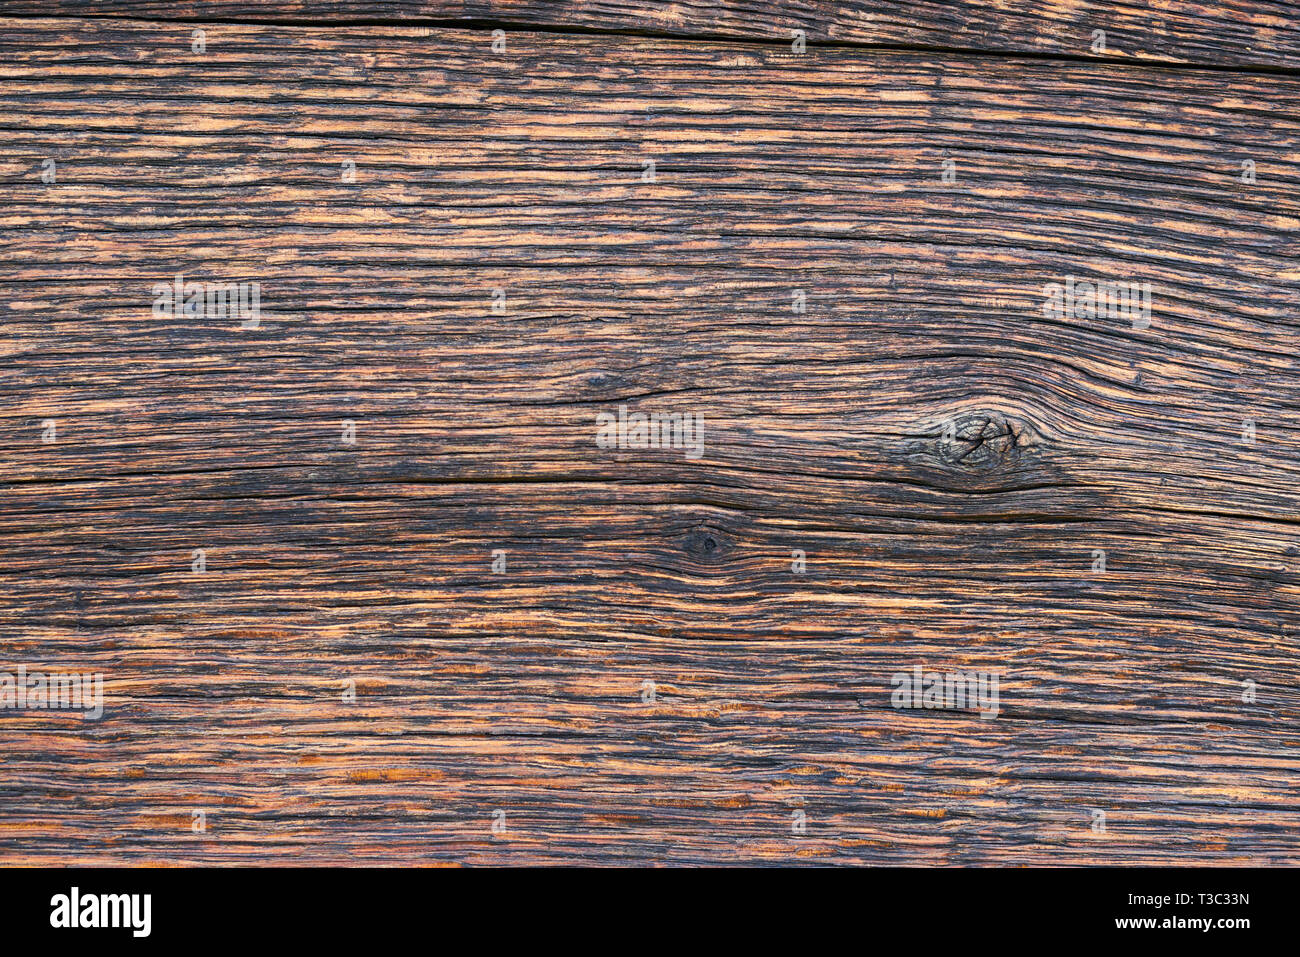 Closeup pattern of old oak wood for background or old wooden texture. Old oak for vintage table or furniture texture. More than a hundred years old wo Stock Photo